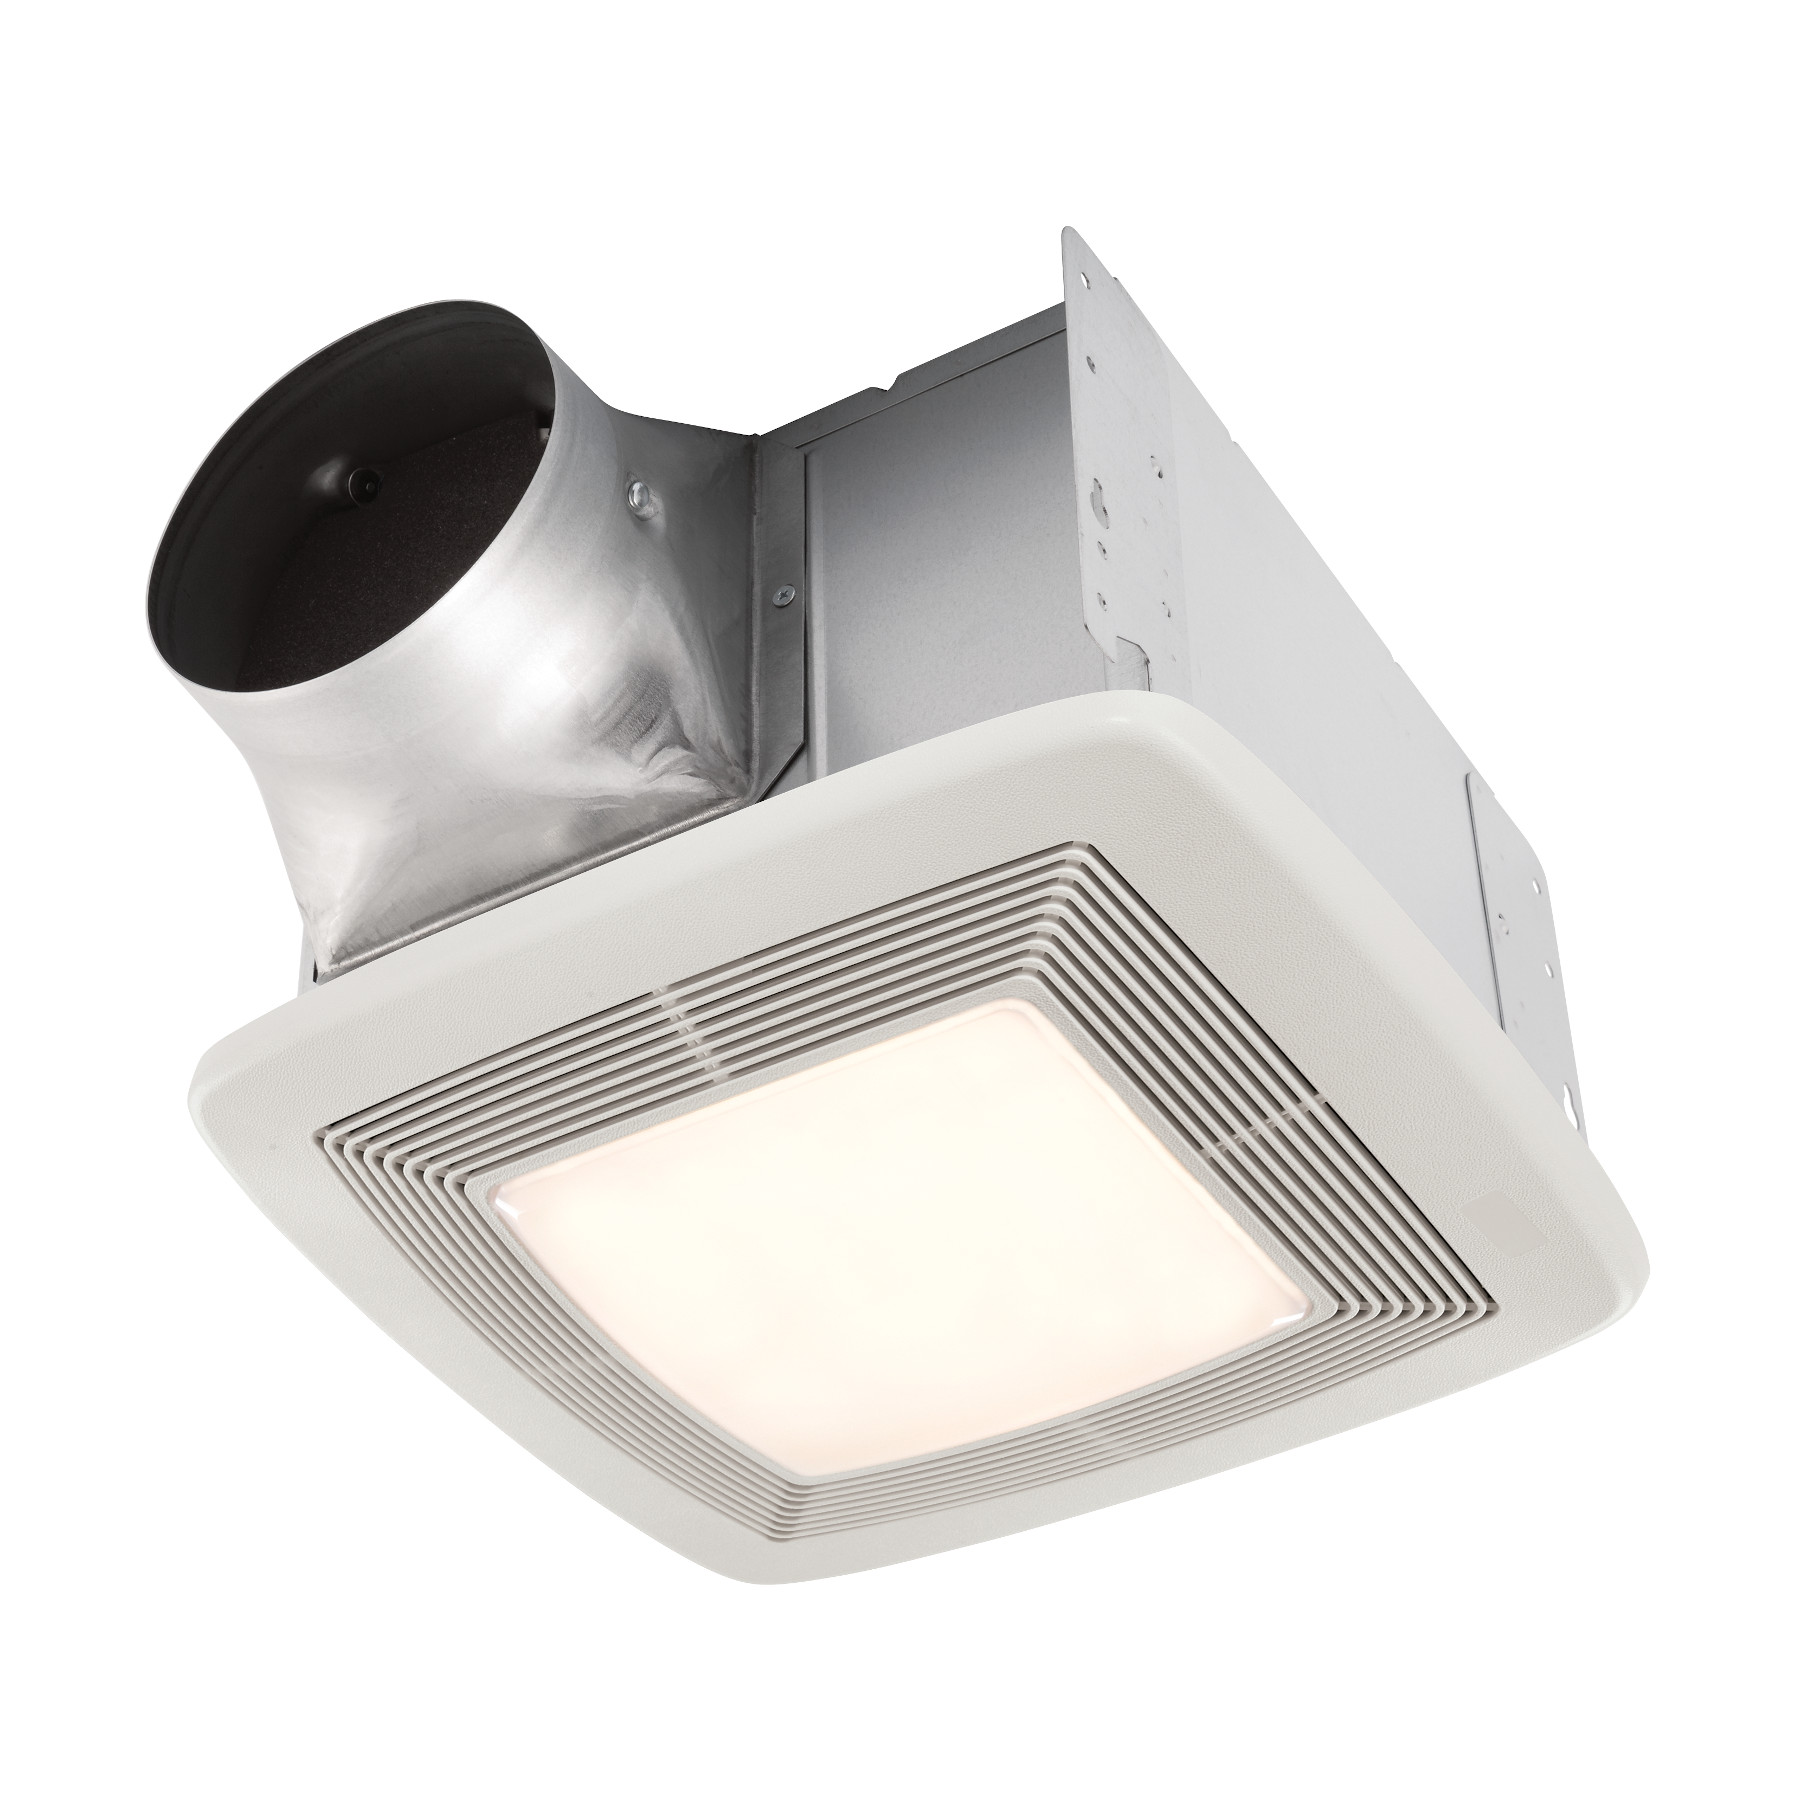 QT Series Quiet 130 CFM Ceiling Bathroom Exhaust Fan with Light and Night Light, 1.5 Sones; ENERGY STAR® Certified